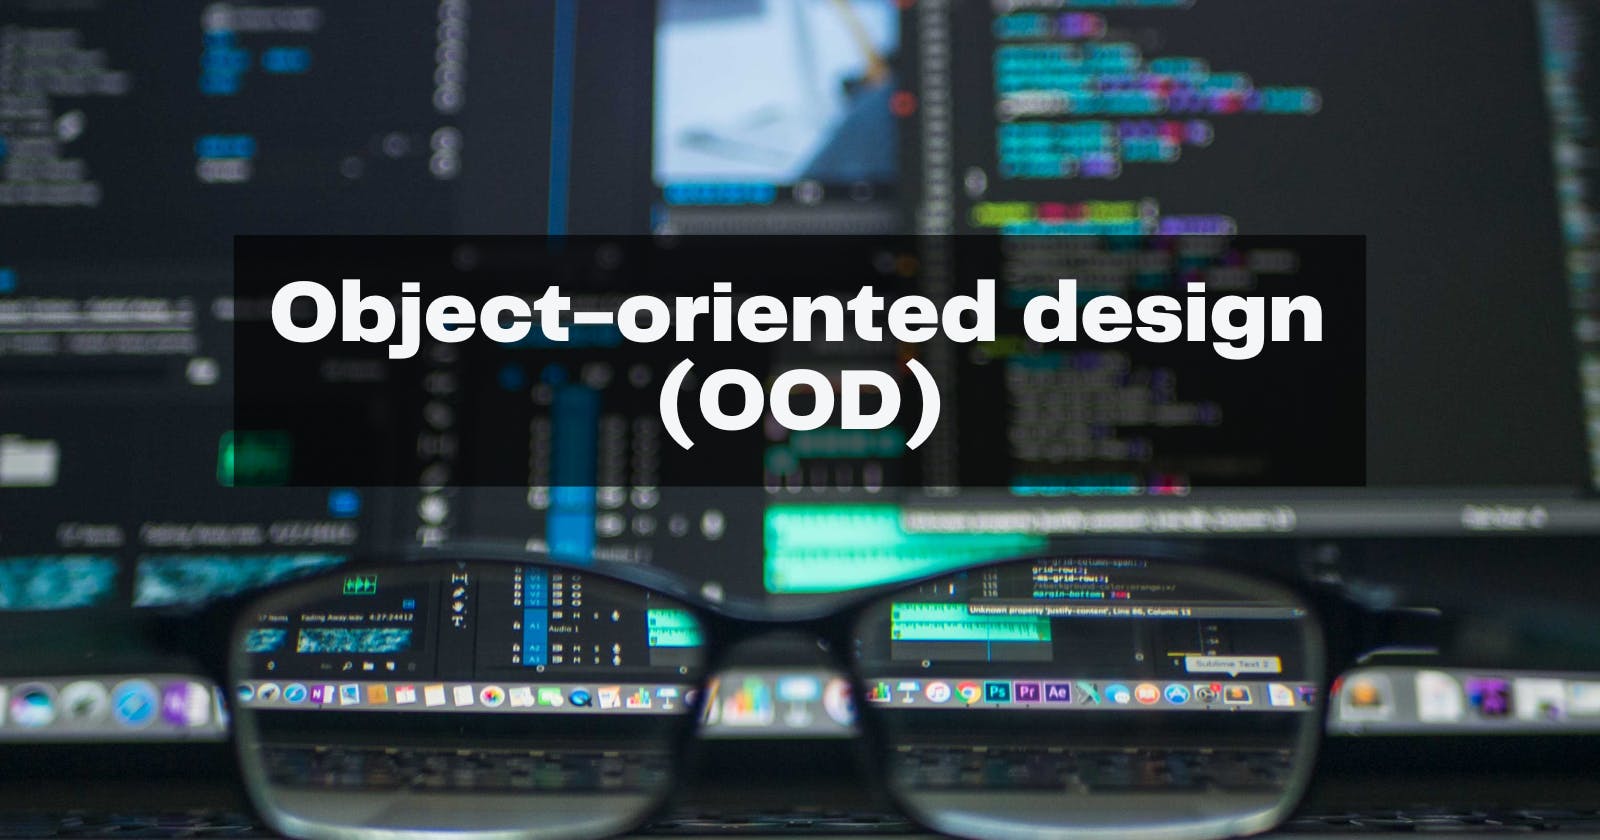 Object-Oriented Design (OOD) Goals